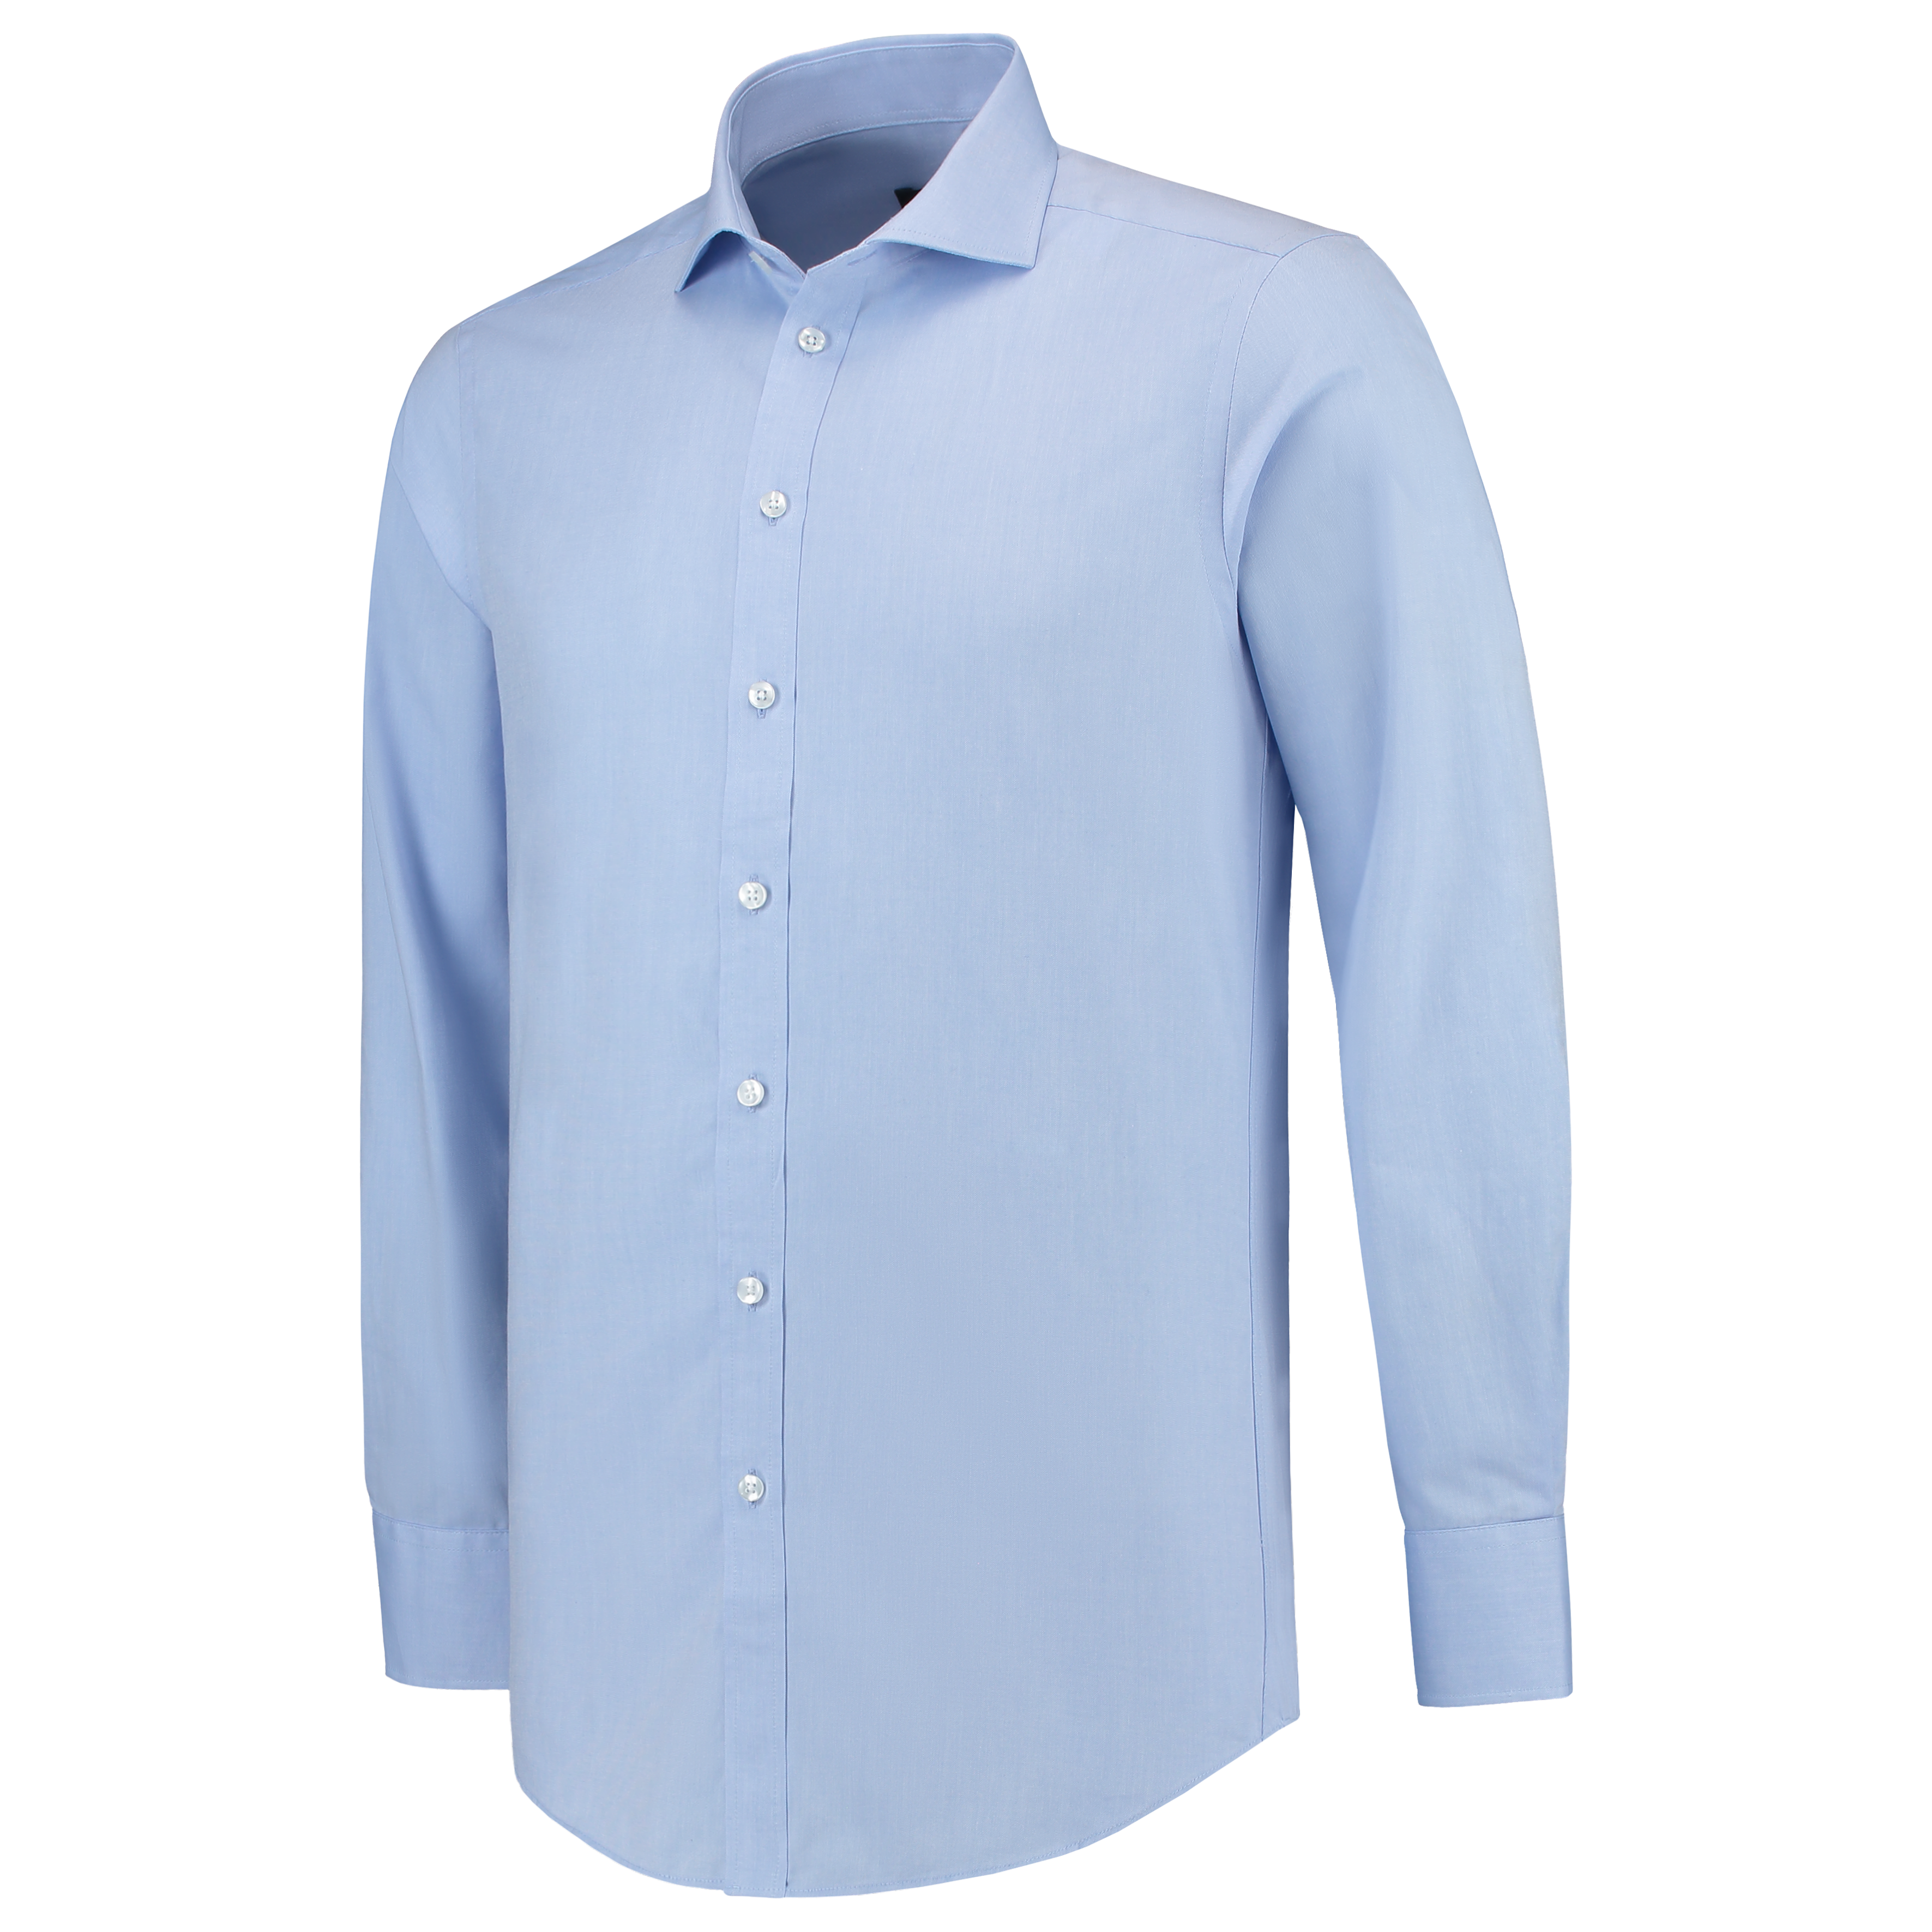 Oxford shirt fitted